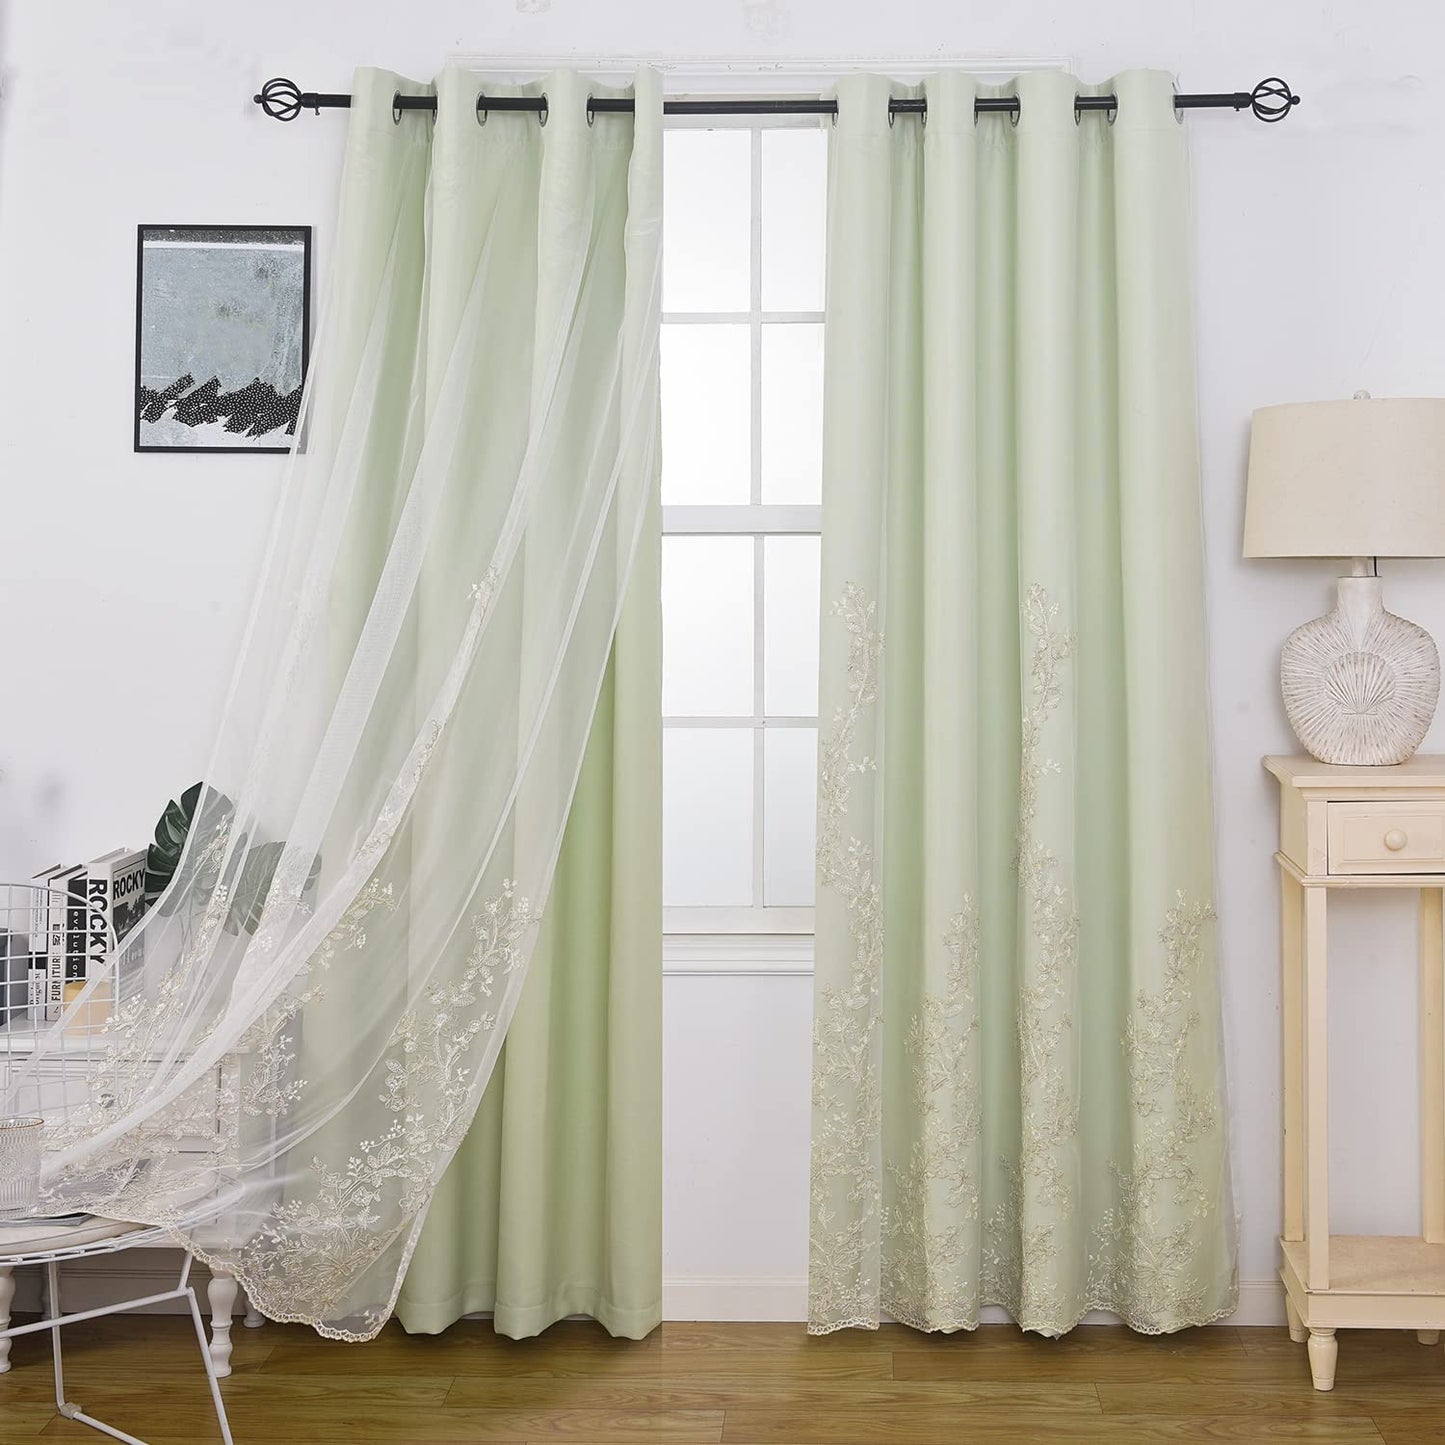 Double Layer Curtains With Embroiered Sheer Voile Room Darkening Grommet Top Drapes for Girls